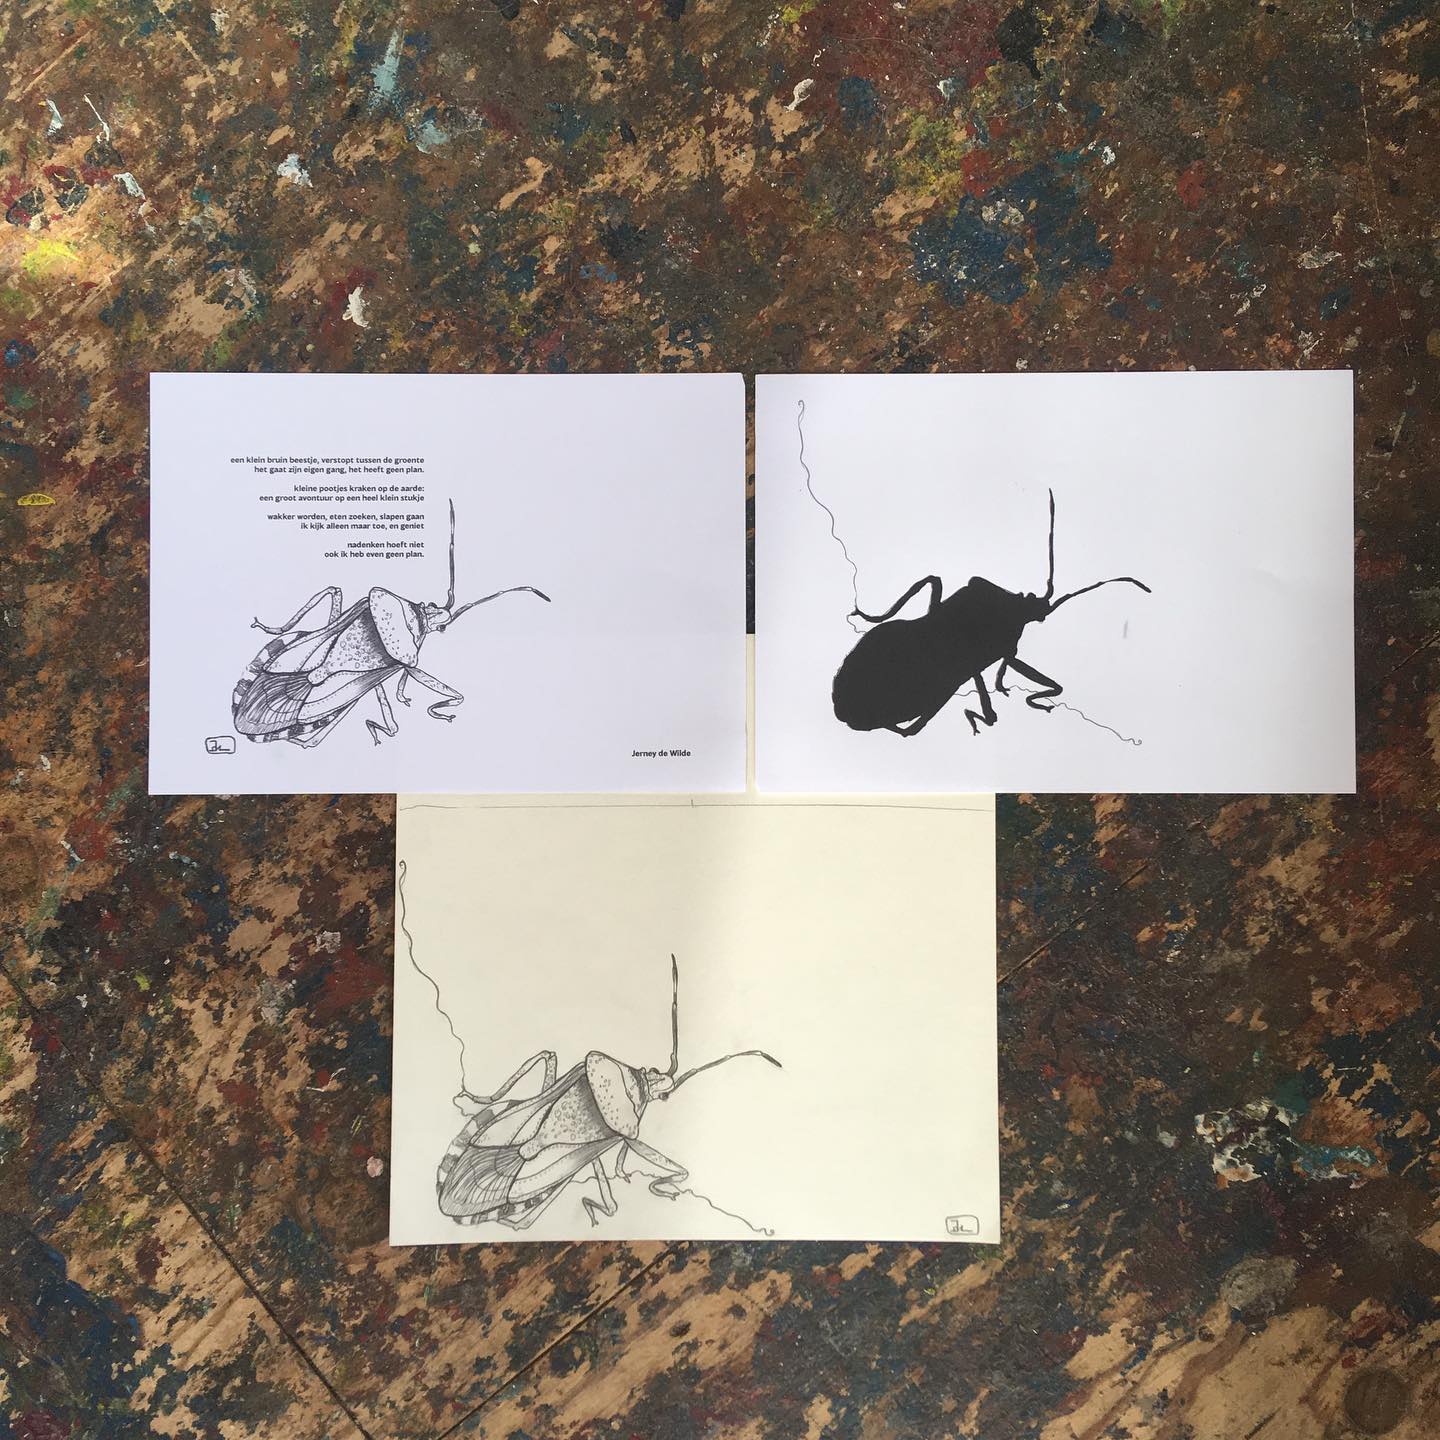 For @cultuurvlinder ‘s new project Buitenkamerworkshops, we made a little example booklet to show the workshop participants how Riso printing works. Participants will also be making a poem, so we made some too. These are the drawing and the preparation for riso, which I will show in my next post :).The little bug is called a Stinkbug (I just discovered haha!) In Dutch we call it a “grauwe schildwants” because of it’s gorgeous shield. I love discovering them @inhettoverbosch ????.#schildwants #stinkbug #grauweschildwants #riso #grafischewerkplaatsdenhaag #printmaking #grafiek #bookmaking